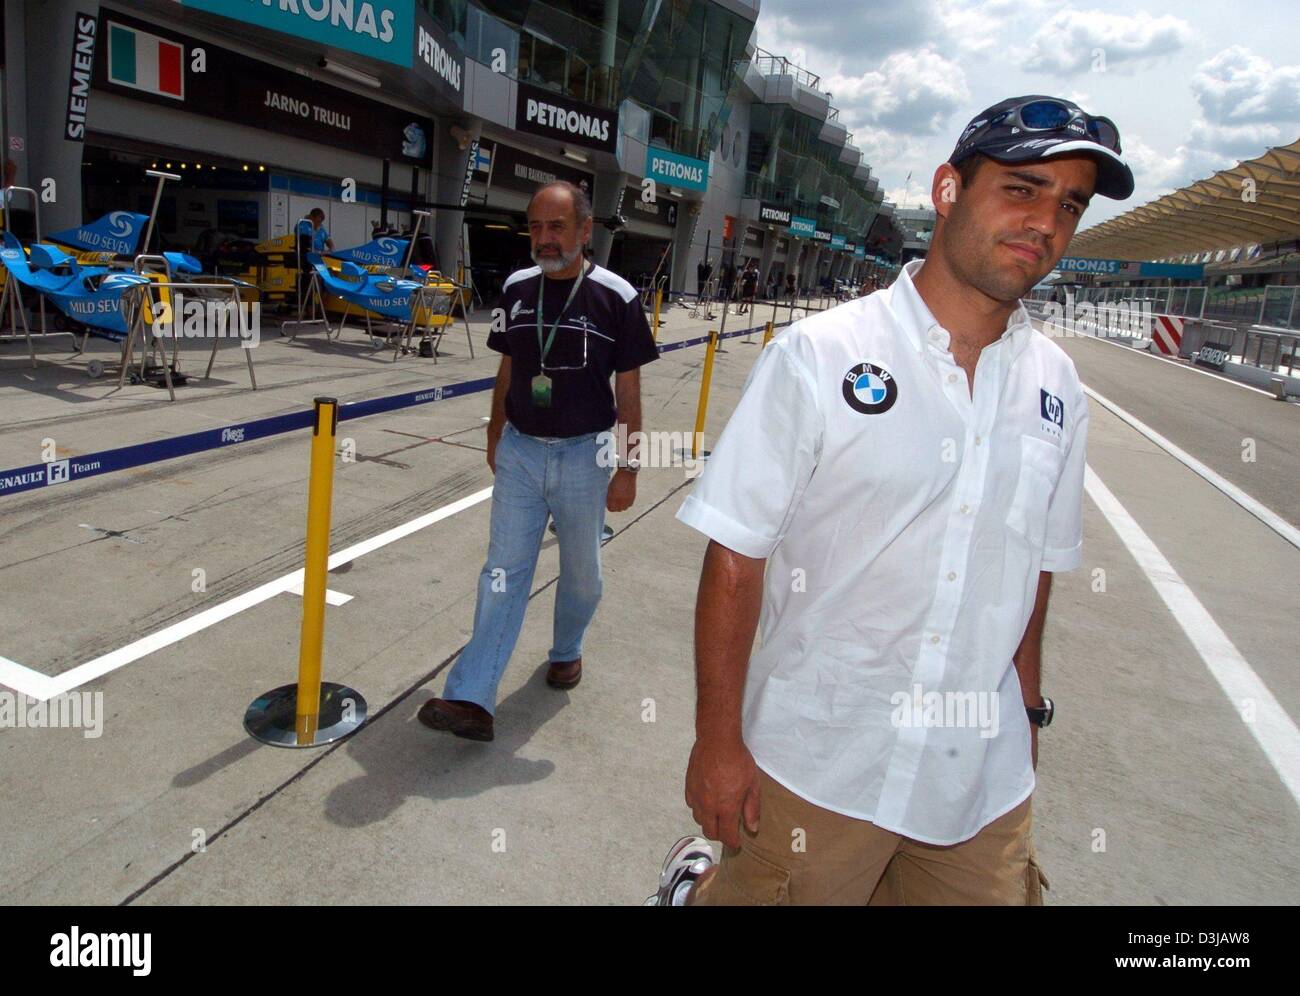 (dpa) The Colombian F1 pilot Juan Pablo Montoya (BMW-Williams) and his father (left-no first name given) stroll through the paddock area of the Sepang racetrack near Kuala Lumpur on Thursday, 18 March 2004. On Sunday, 21 March 2004, the Grand Prix of Malaysia will underway. Stock Photo